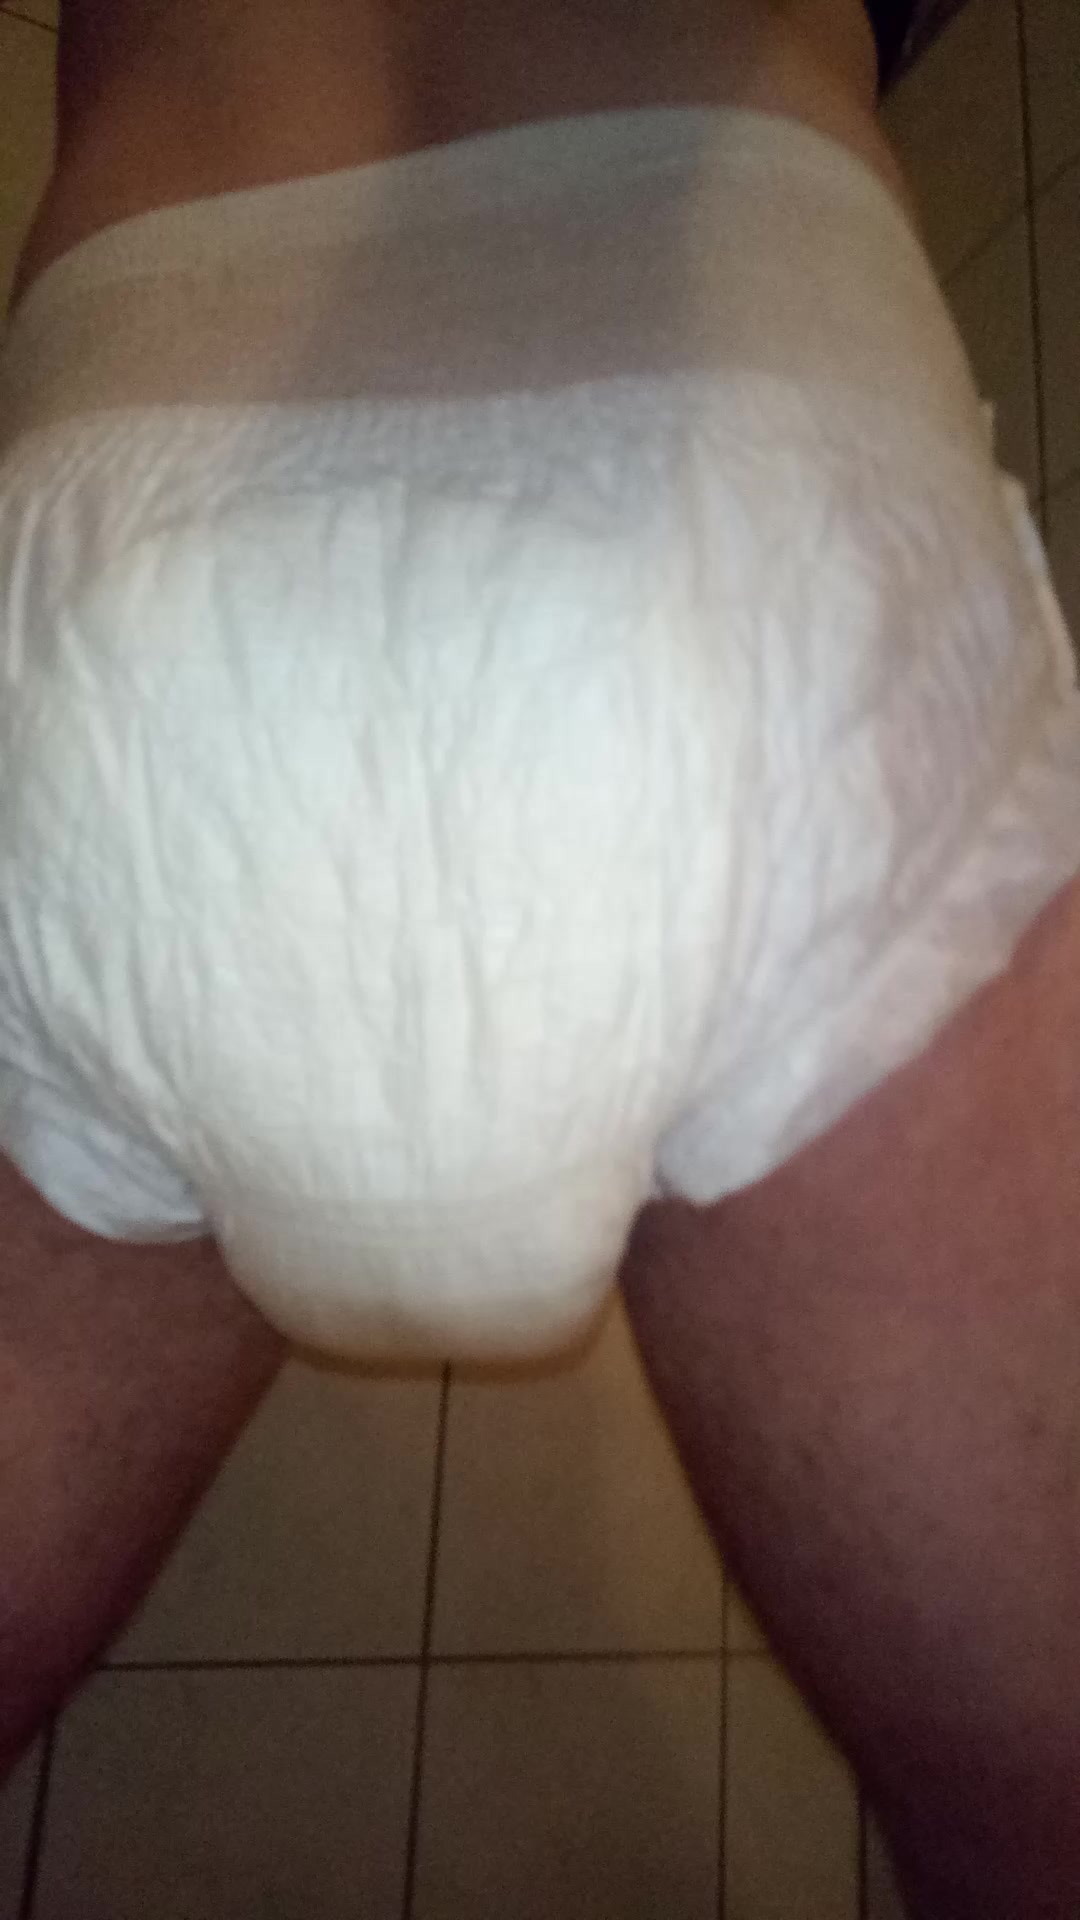 Diaper well filled, squuezed and opened